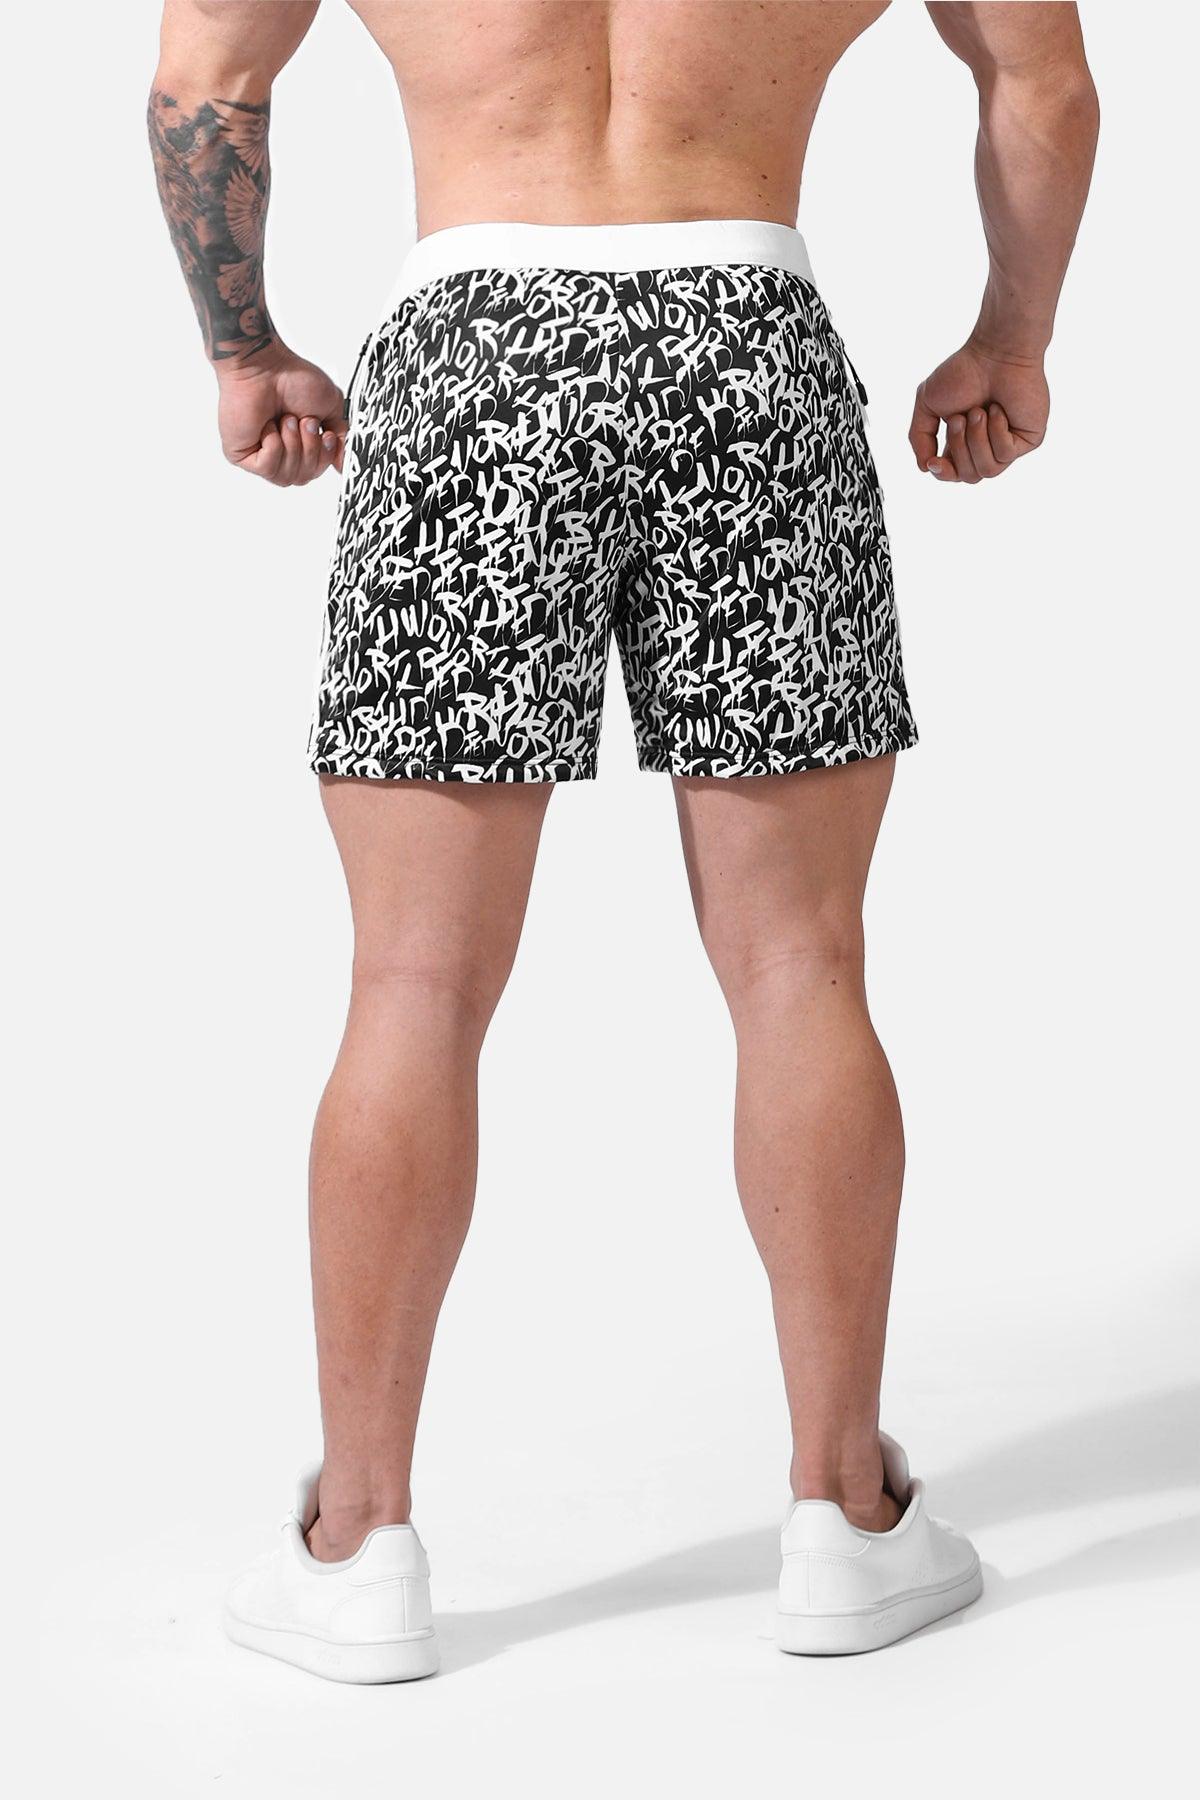 Ace Graphic Casual 5" Shorts 2.0 - Jed North Chaos - Jed North Canada